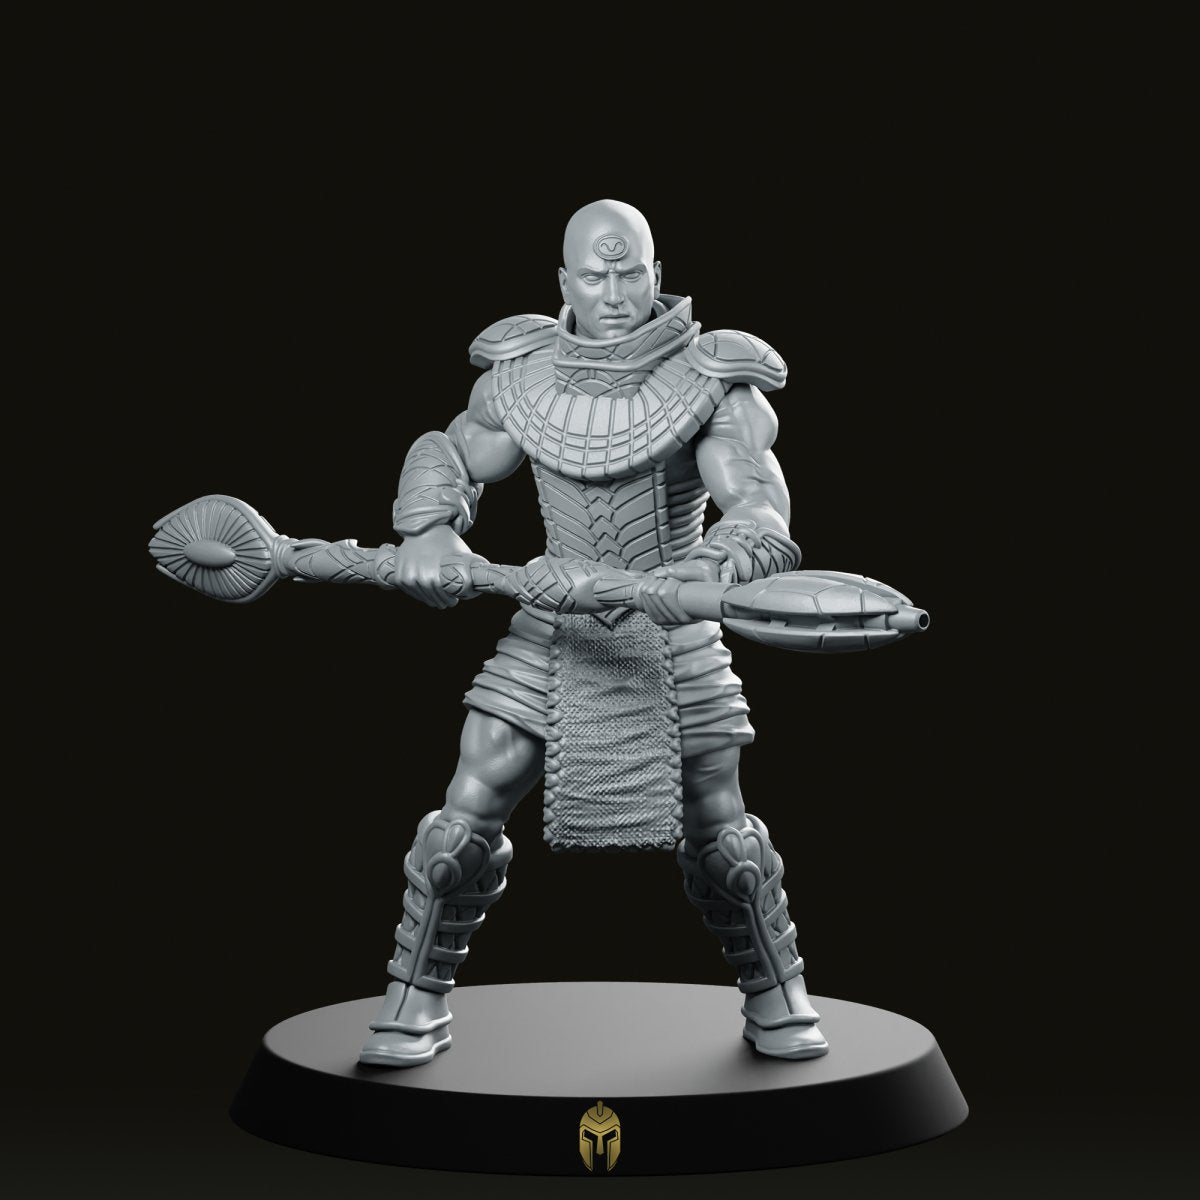 Afam the Traitor 2 Miniature - We Print Miniatures -Papsikels Miniatures